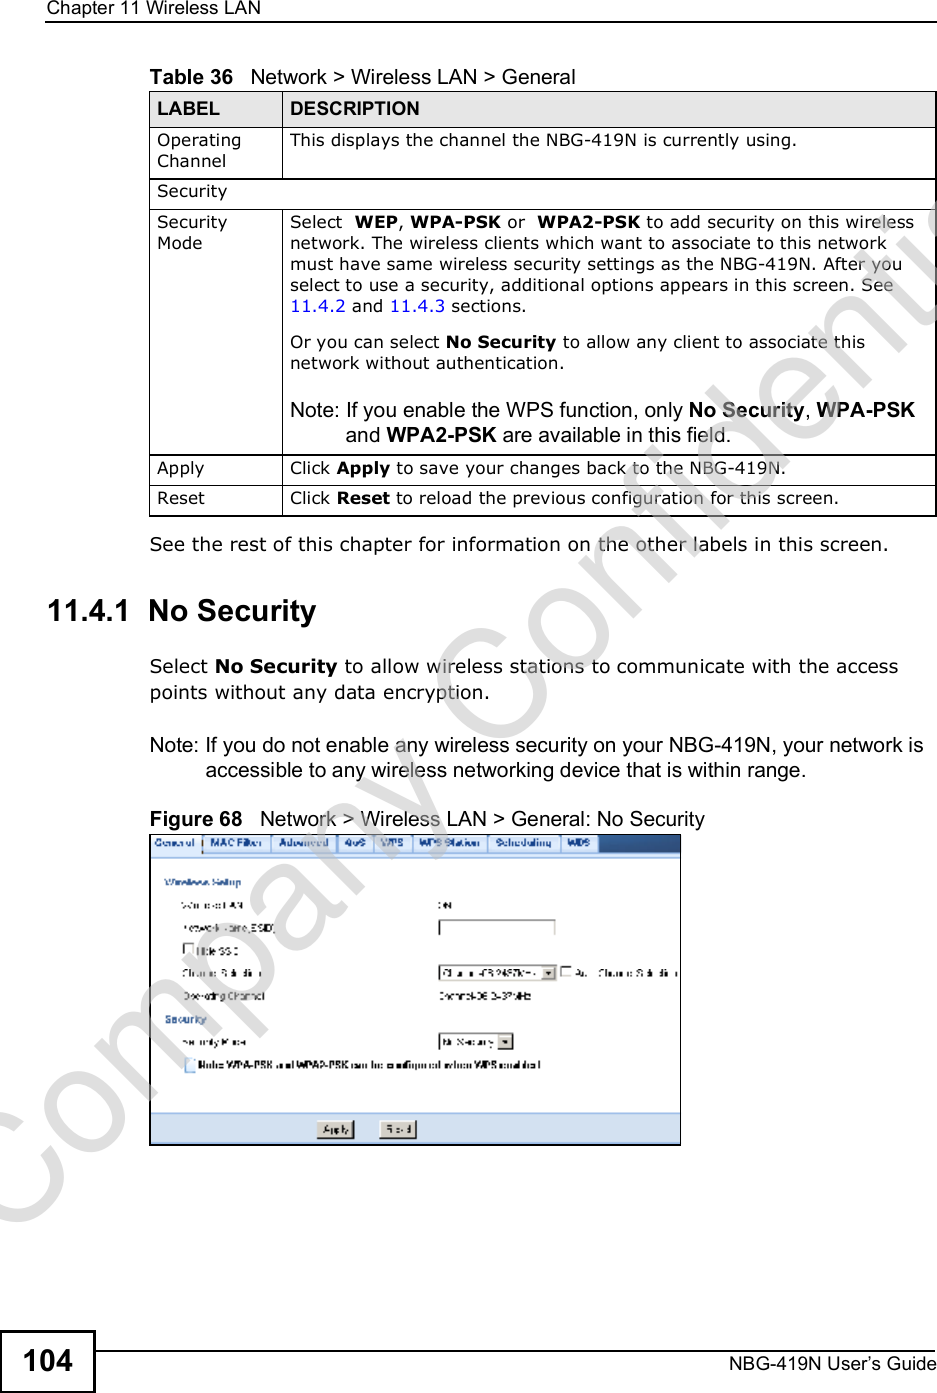 Chapter 11Wireless LANNBG-419N User s Guide104See the rest of this chapter for information on the other labels in this screen. 11.4.1  No SecuritySelect No Security to allow wireless stations to communicate with the access points without any data encryption.Note: If you do not enable any wireless security on your NBG-419N, your network is accessible to any wireless networking device that is within range.Figure 68   Network &gt; Wireless LAN &gt; General: No SecurityOperating Channel This displays the channel the NBG-419N is currently using.SecuritySecurity ModeSelect  WEP, WPA-PSK or  WPA2-PSK to add security on this wireless network. The wireless clients which want to associate to this network must have same wireless security settings as the NBG-419N. After you select to use a security, additional options appears in this screen. See 11.4.2 and 11.4.3 sections. Or you can select No Security to allow any client to associate this network without authentication.Note: If you enable the WPS function, only No Security, WPA-PSK and WPA2-PSK are available in this field.Apply Click Apply to save your changes back to the NBG-419N.Reset Click Reset to reload the previous configuration for this screen.Table 36   Network &gt; Wireless LAN &gt; GeneralLABEL DESCRIPTIONCompany Confidential